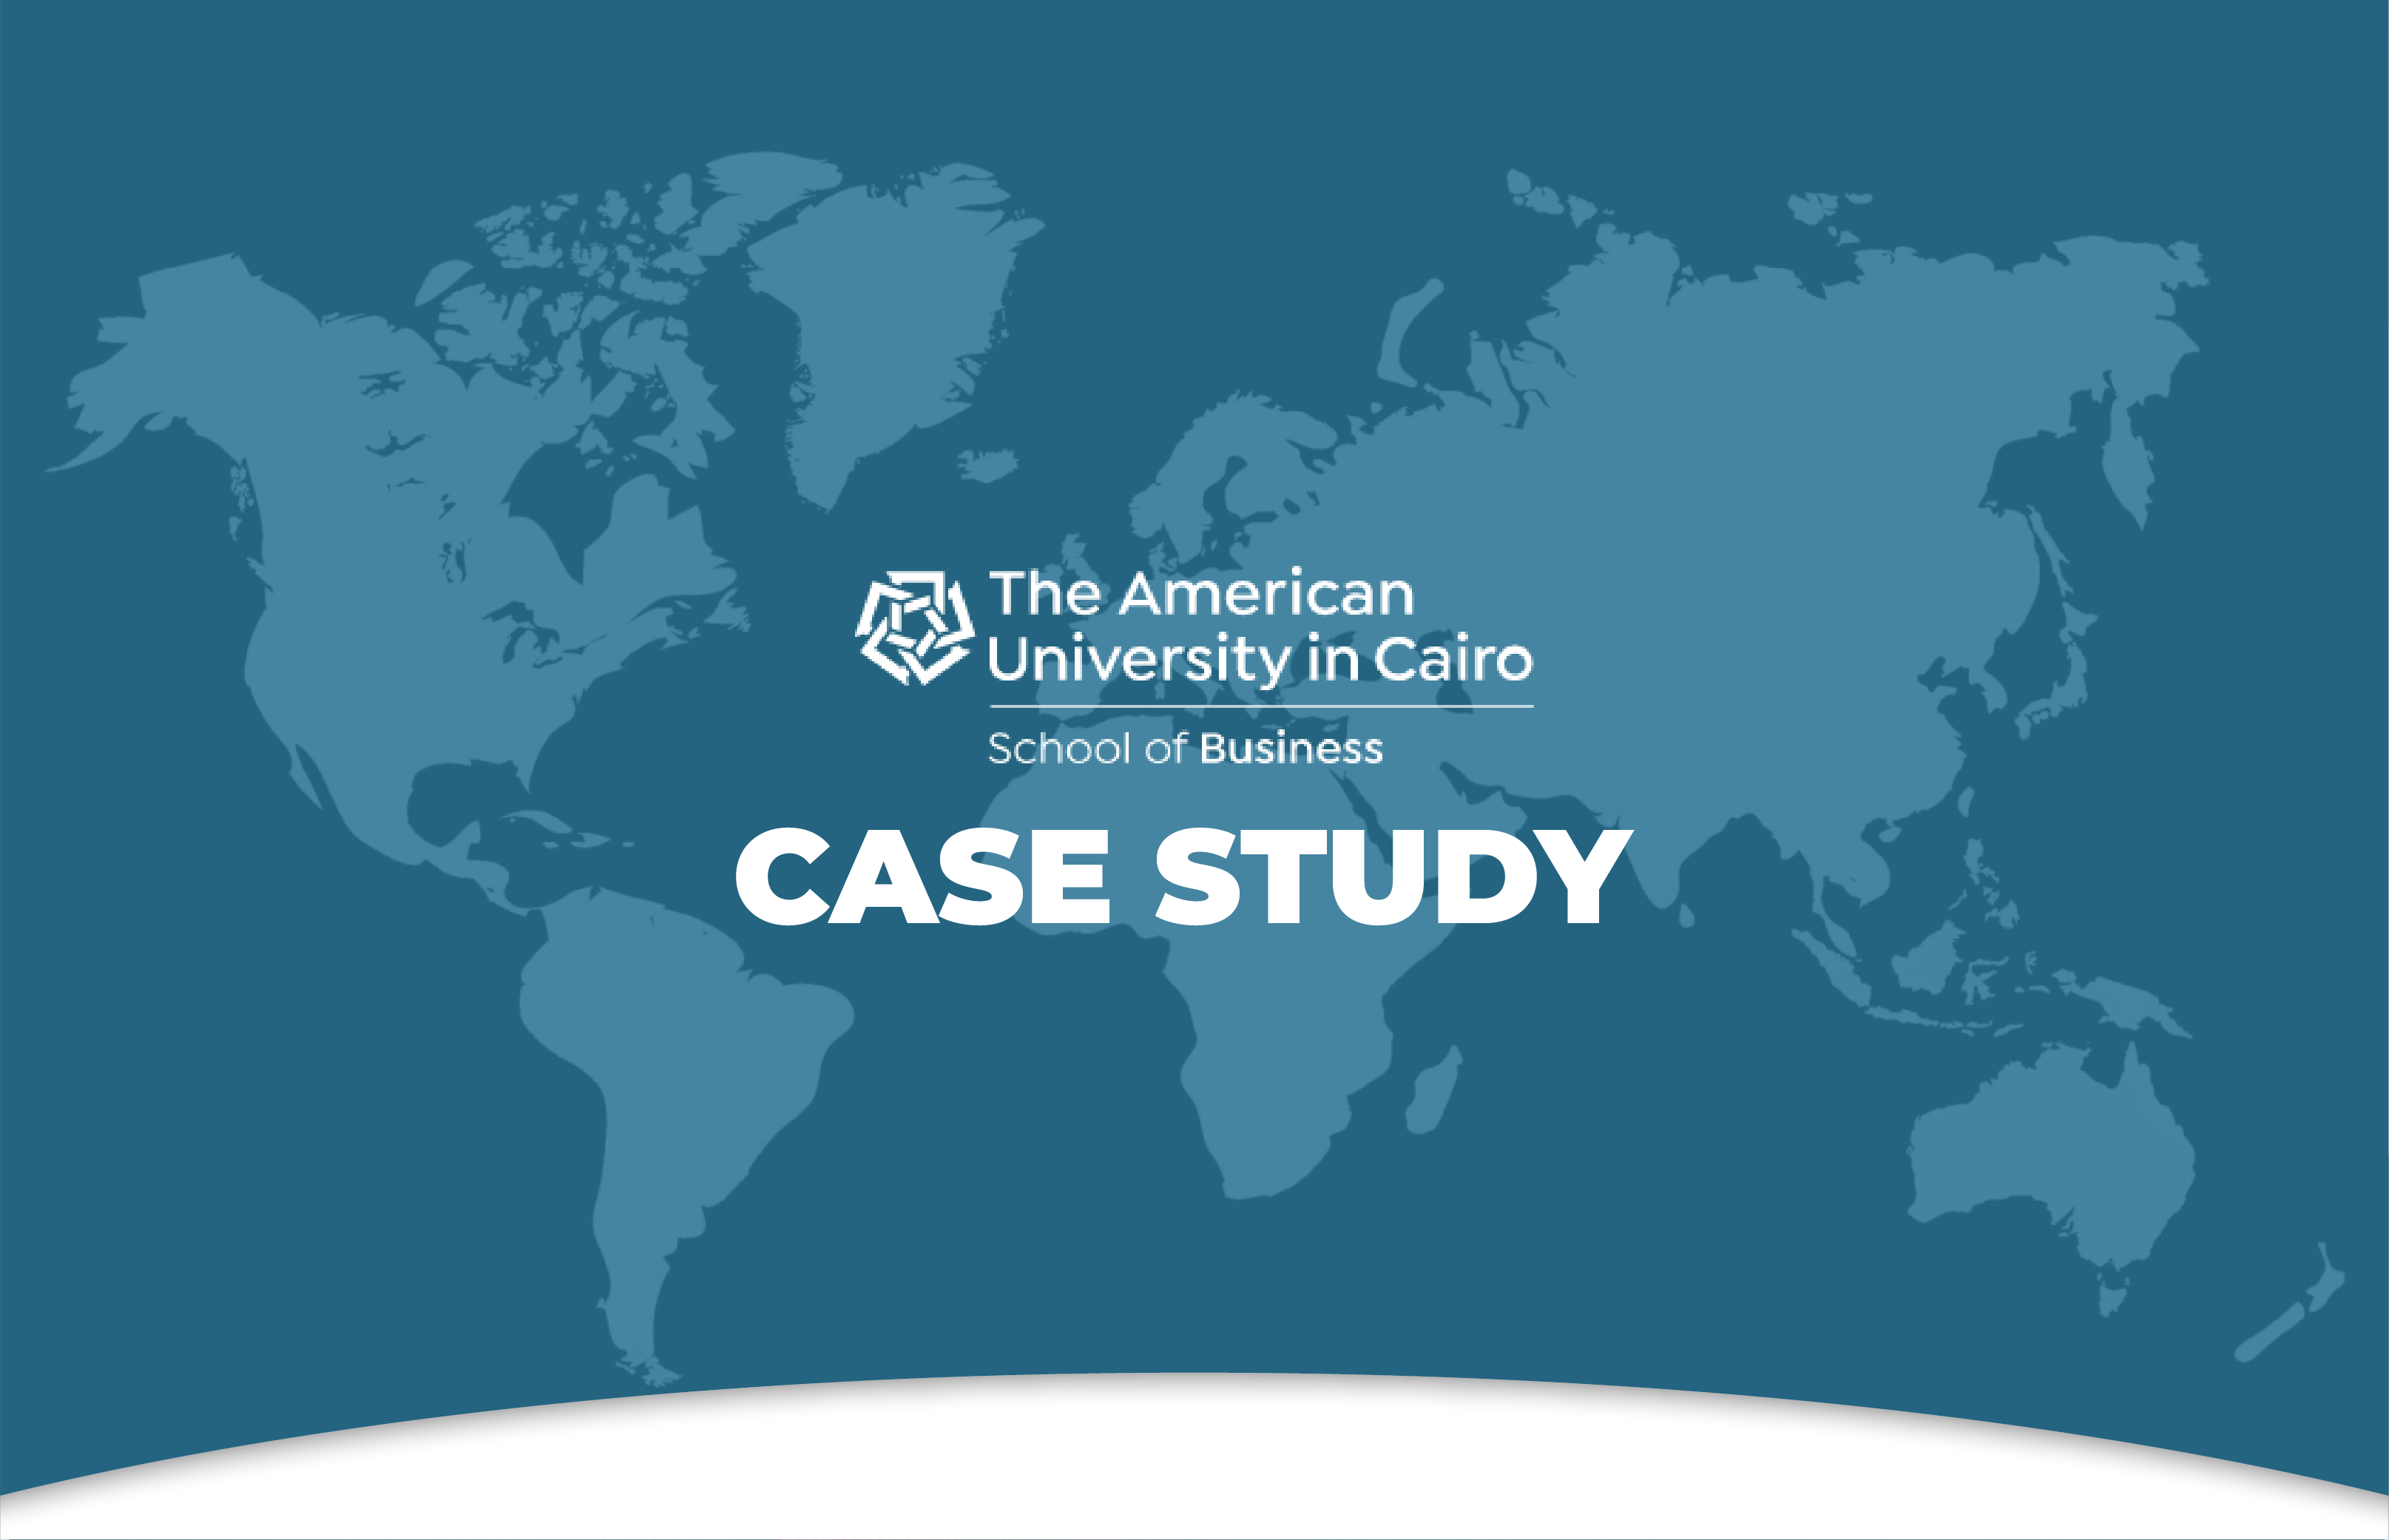 International Case Competition – A Case Study With The American University in Cairo